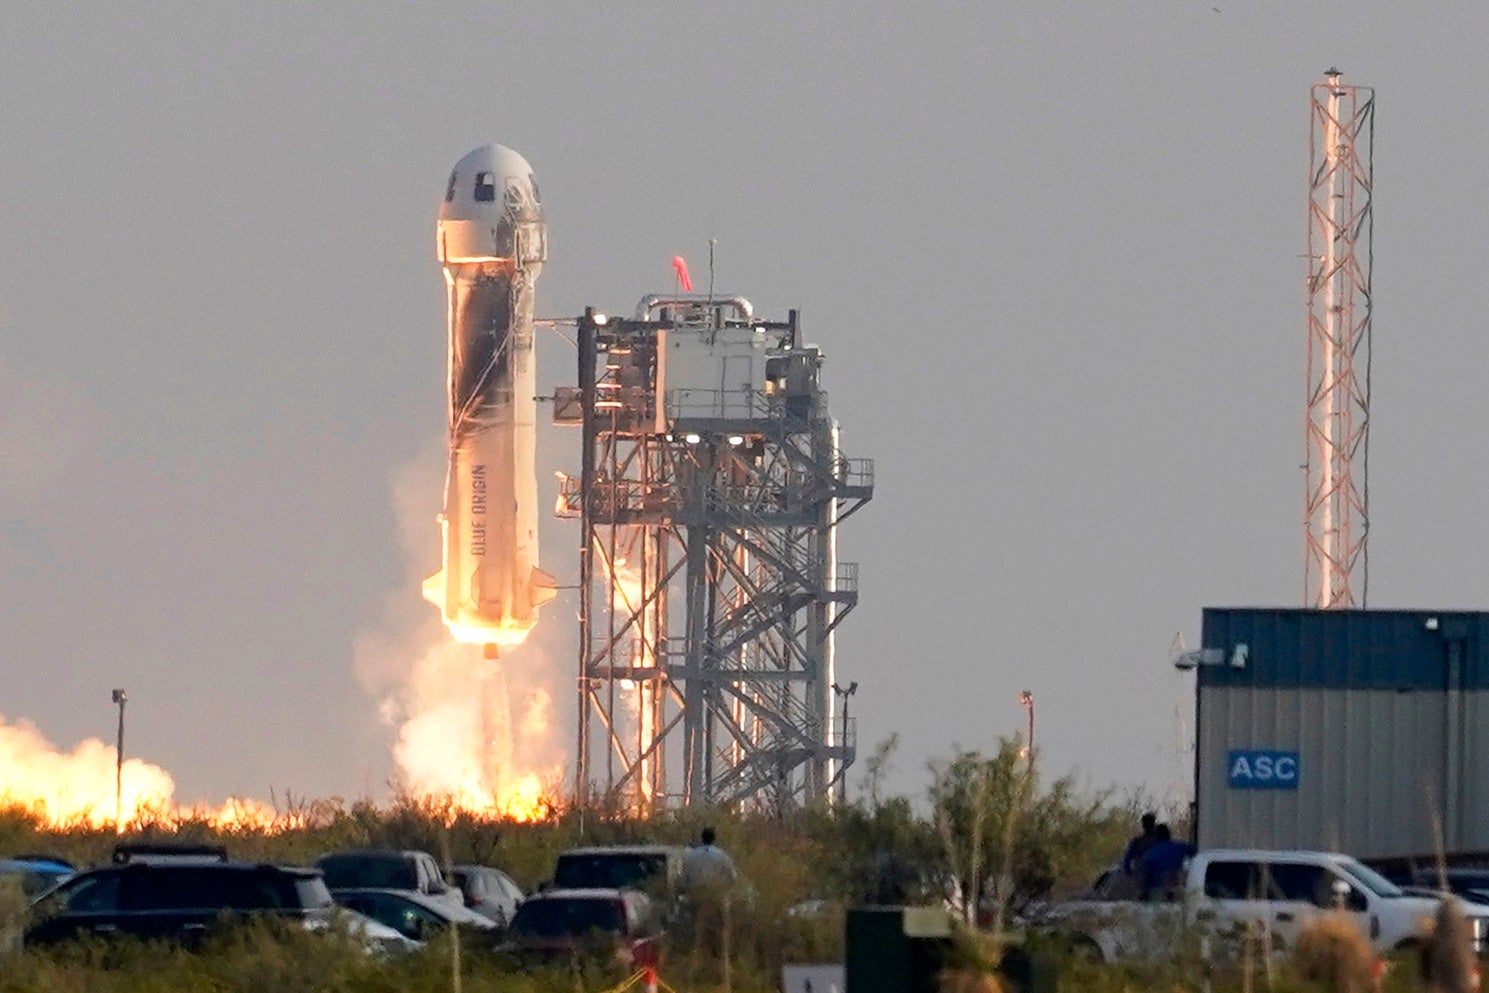 Blue Origin's New Shepard rocket launches carrying passengers Jeff Bezos, founder of Amazon and space tourism company Blue Origin, his brother Mark Bezos, Oliver Daemen and Wally Funk, from its spaceport near Van Horn, Texas